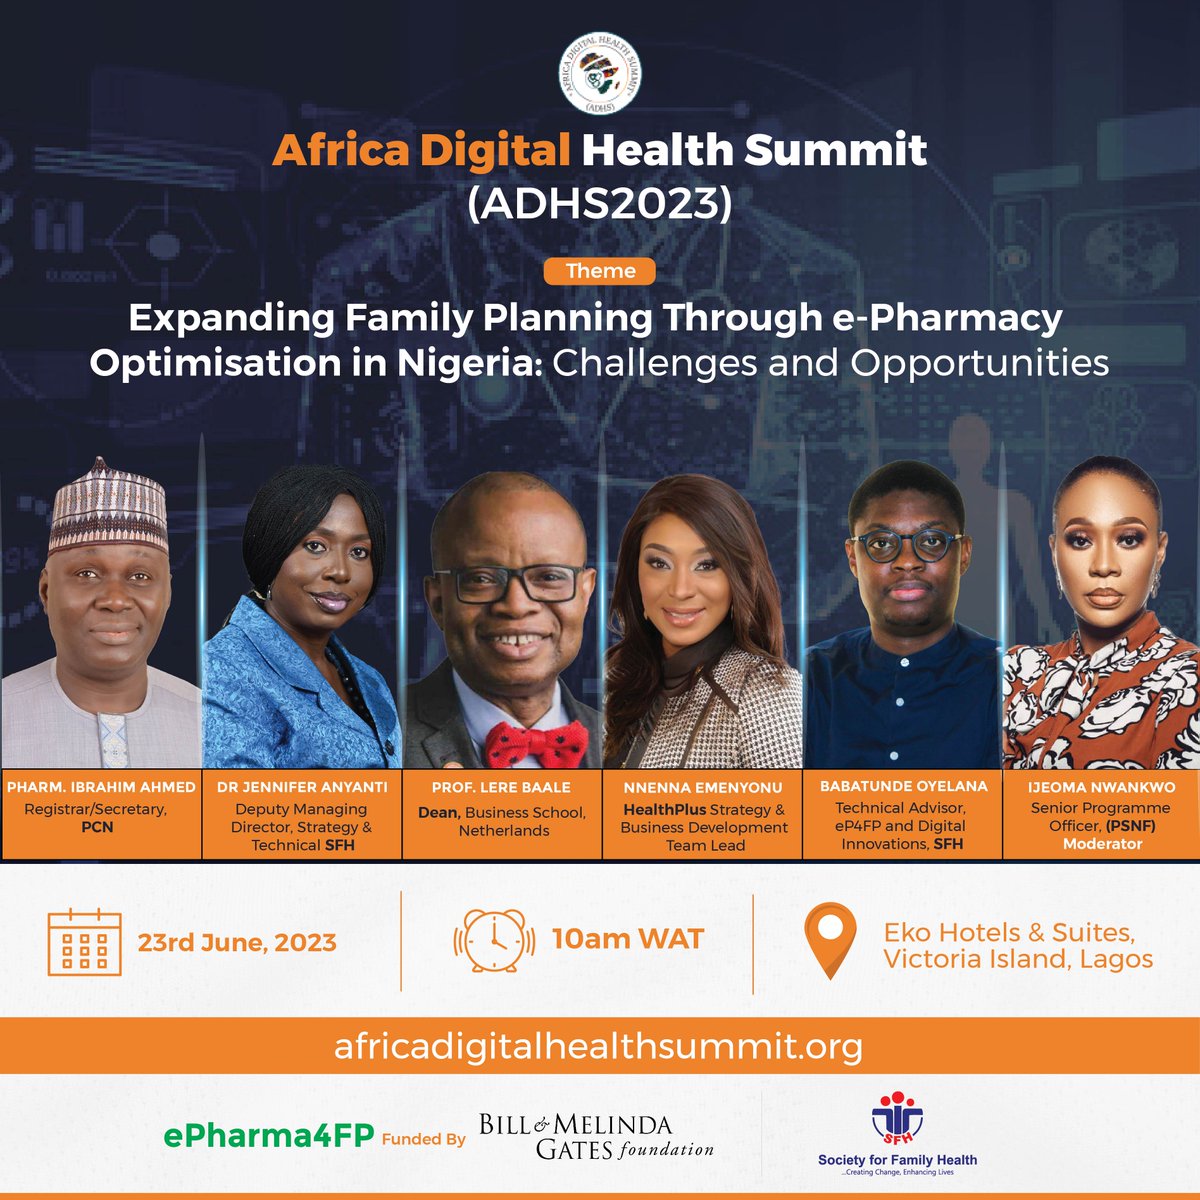 Don't miss out on the Africa Digital Health Summit #ADHS2023, where experts will gather to discuss innovations in Family Planning through digital service delivery and optimisation of E-Pharmacy platforms. 

Join us for this game-changing event and be part of the digital health…